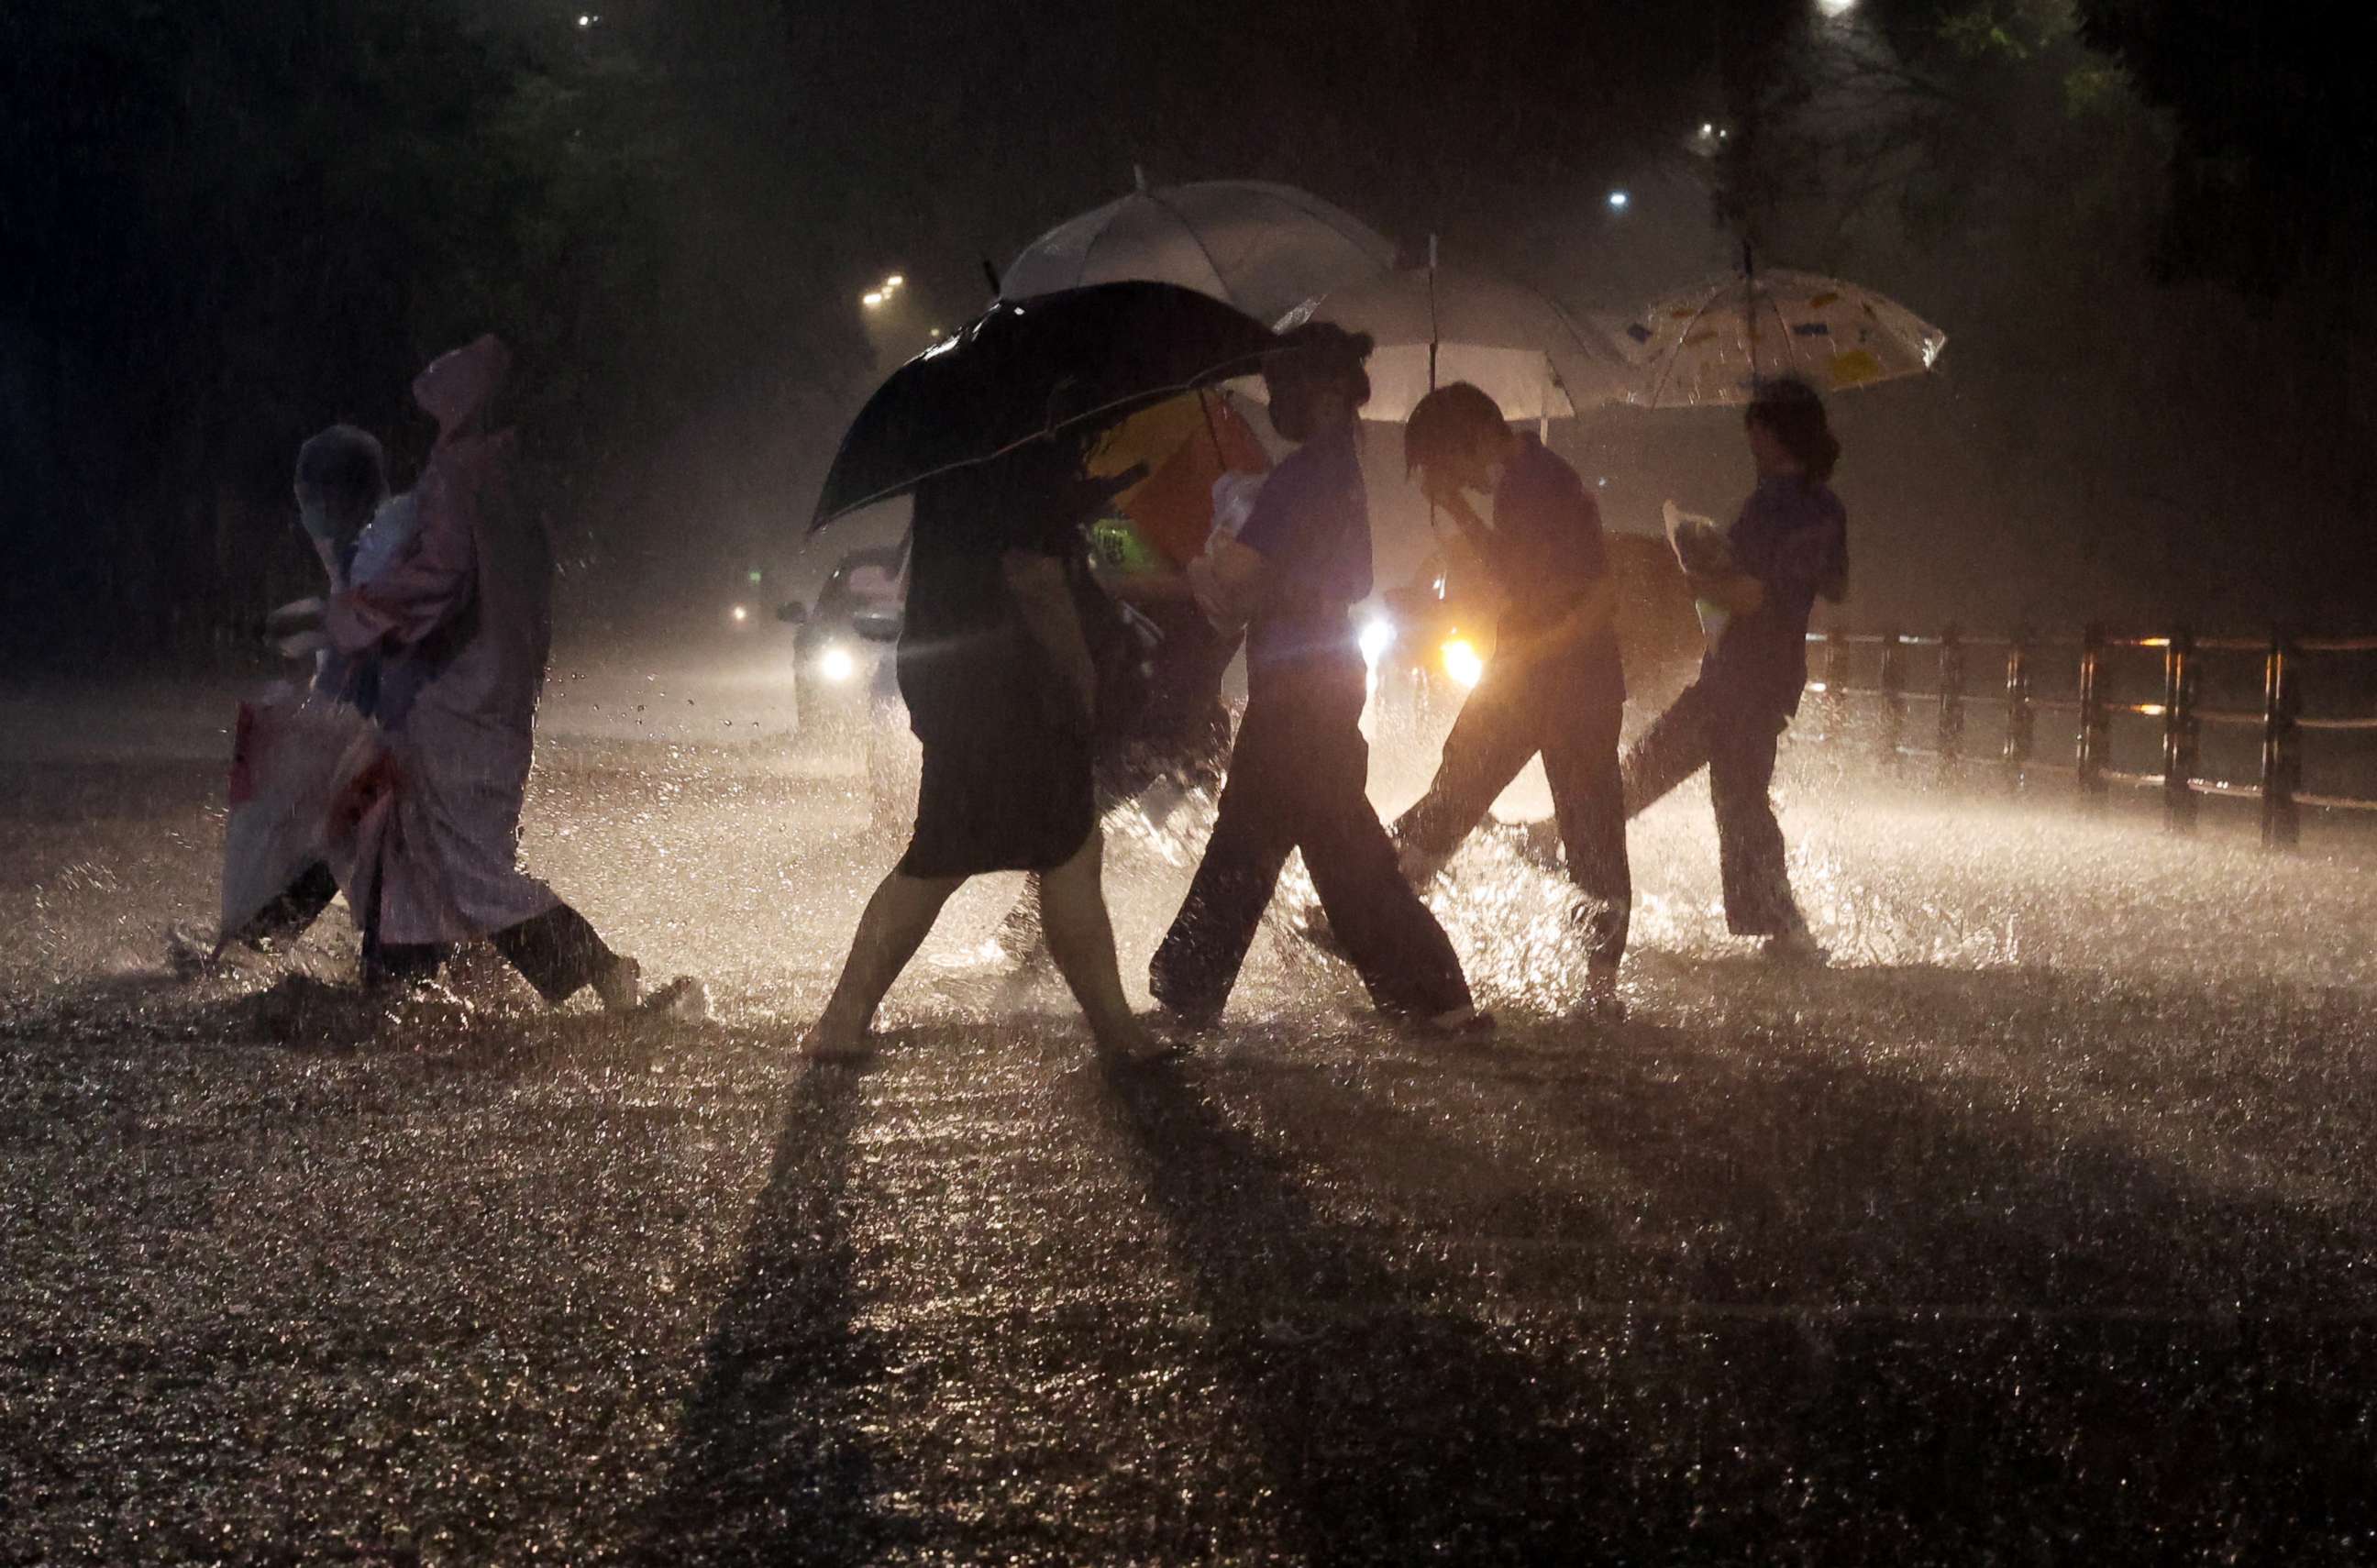 PHOTO: People walk on a zebra crossing in flooded area during heavy rain in Seoul, South Korea, Aug. 8, 2022.